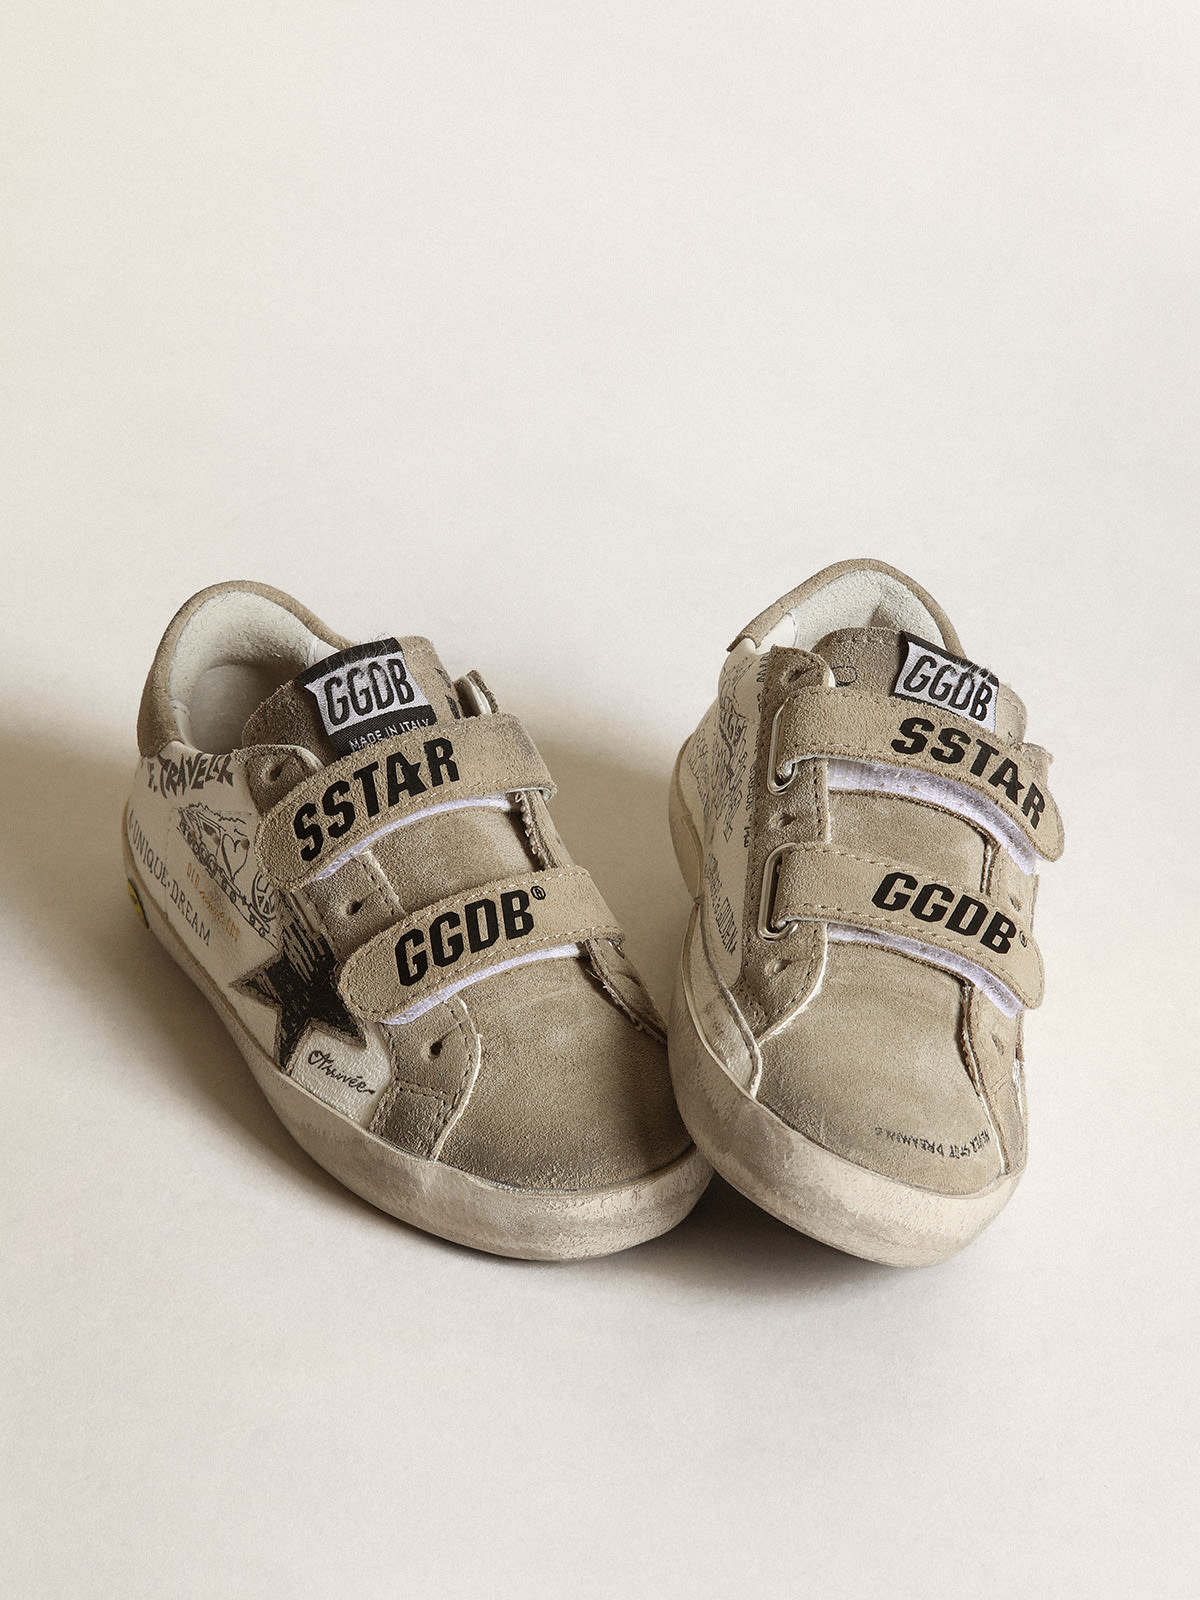 Golden Goose - Young Old School sneakers in white nappa leather with dove-gray suede inserts and mismatched star in 